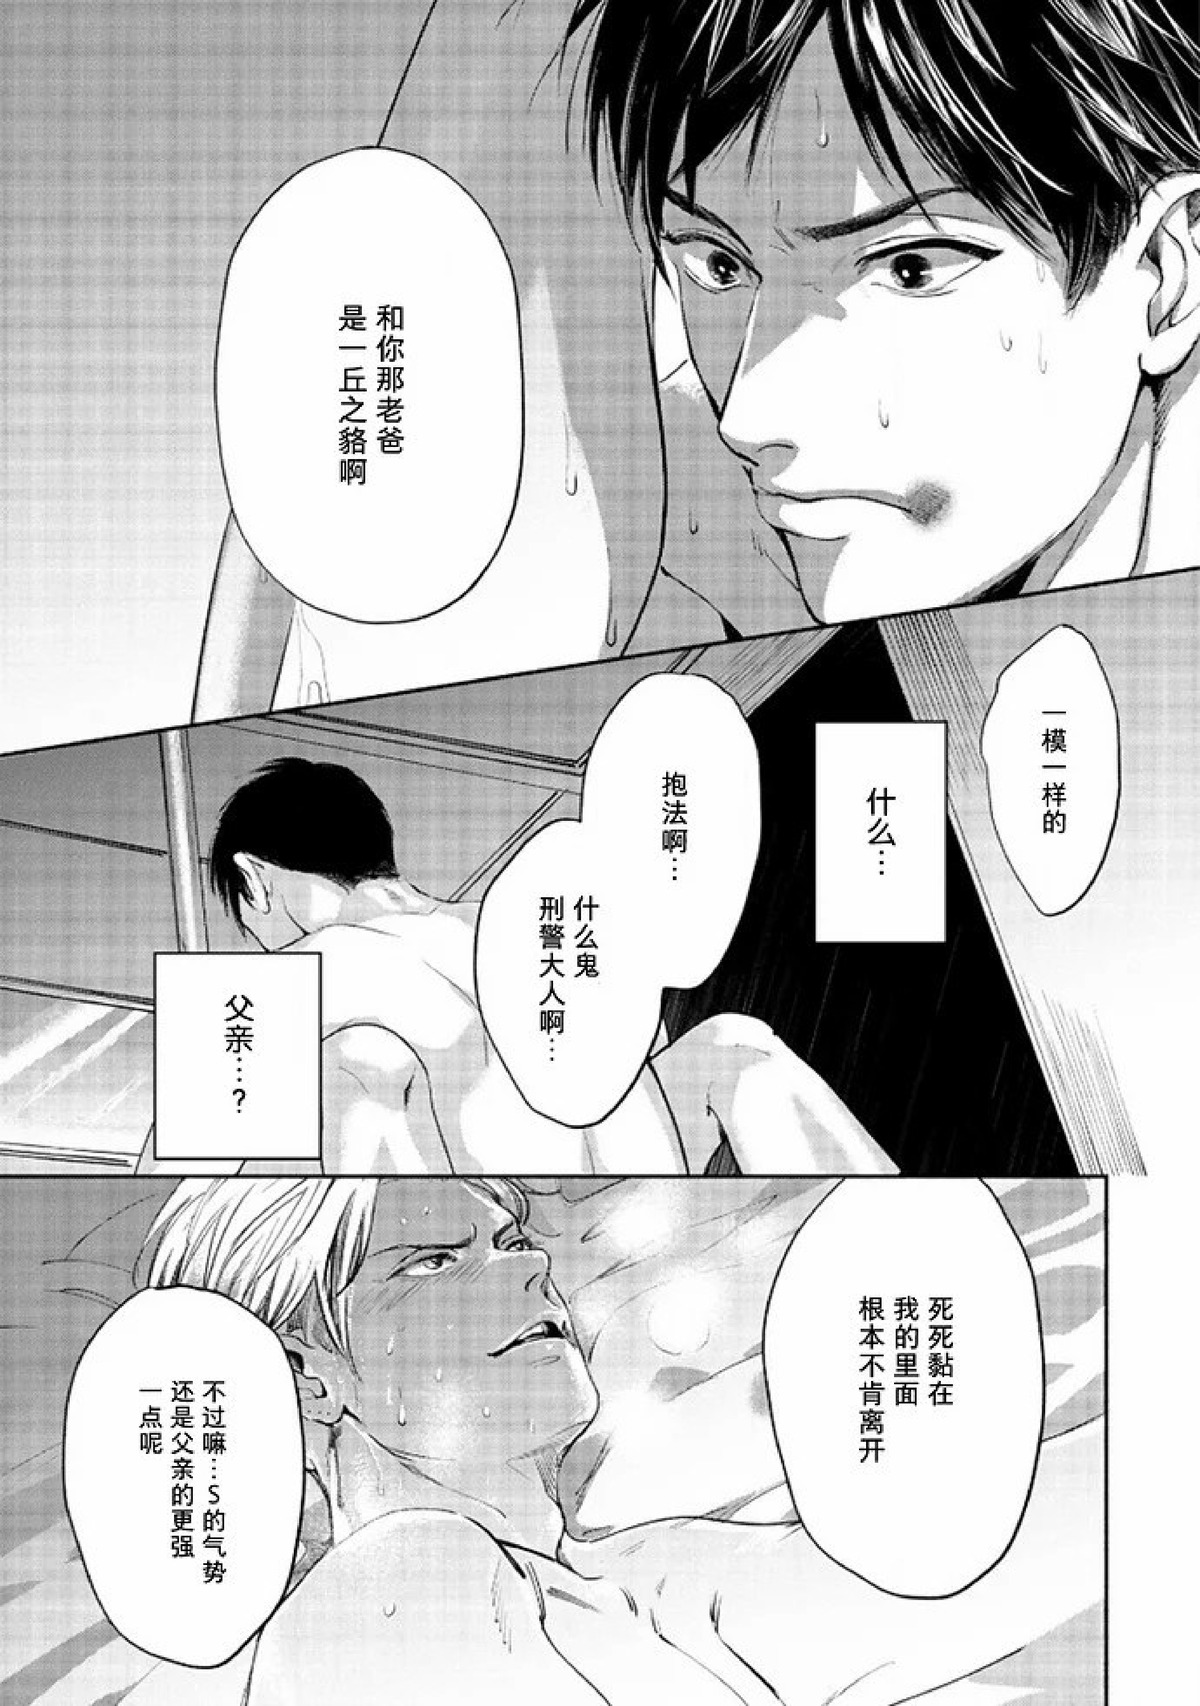 【Two sides of the same coin[耽美]】漫画-（上卷01-02）章节漫画下拉式图片-101.jpg